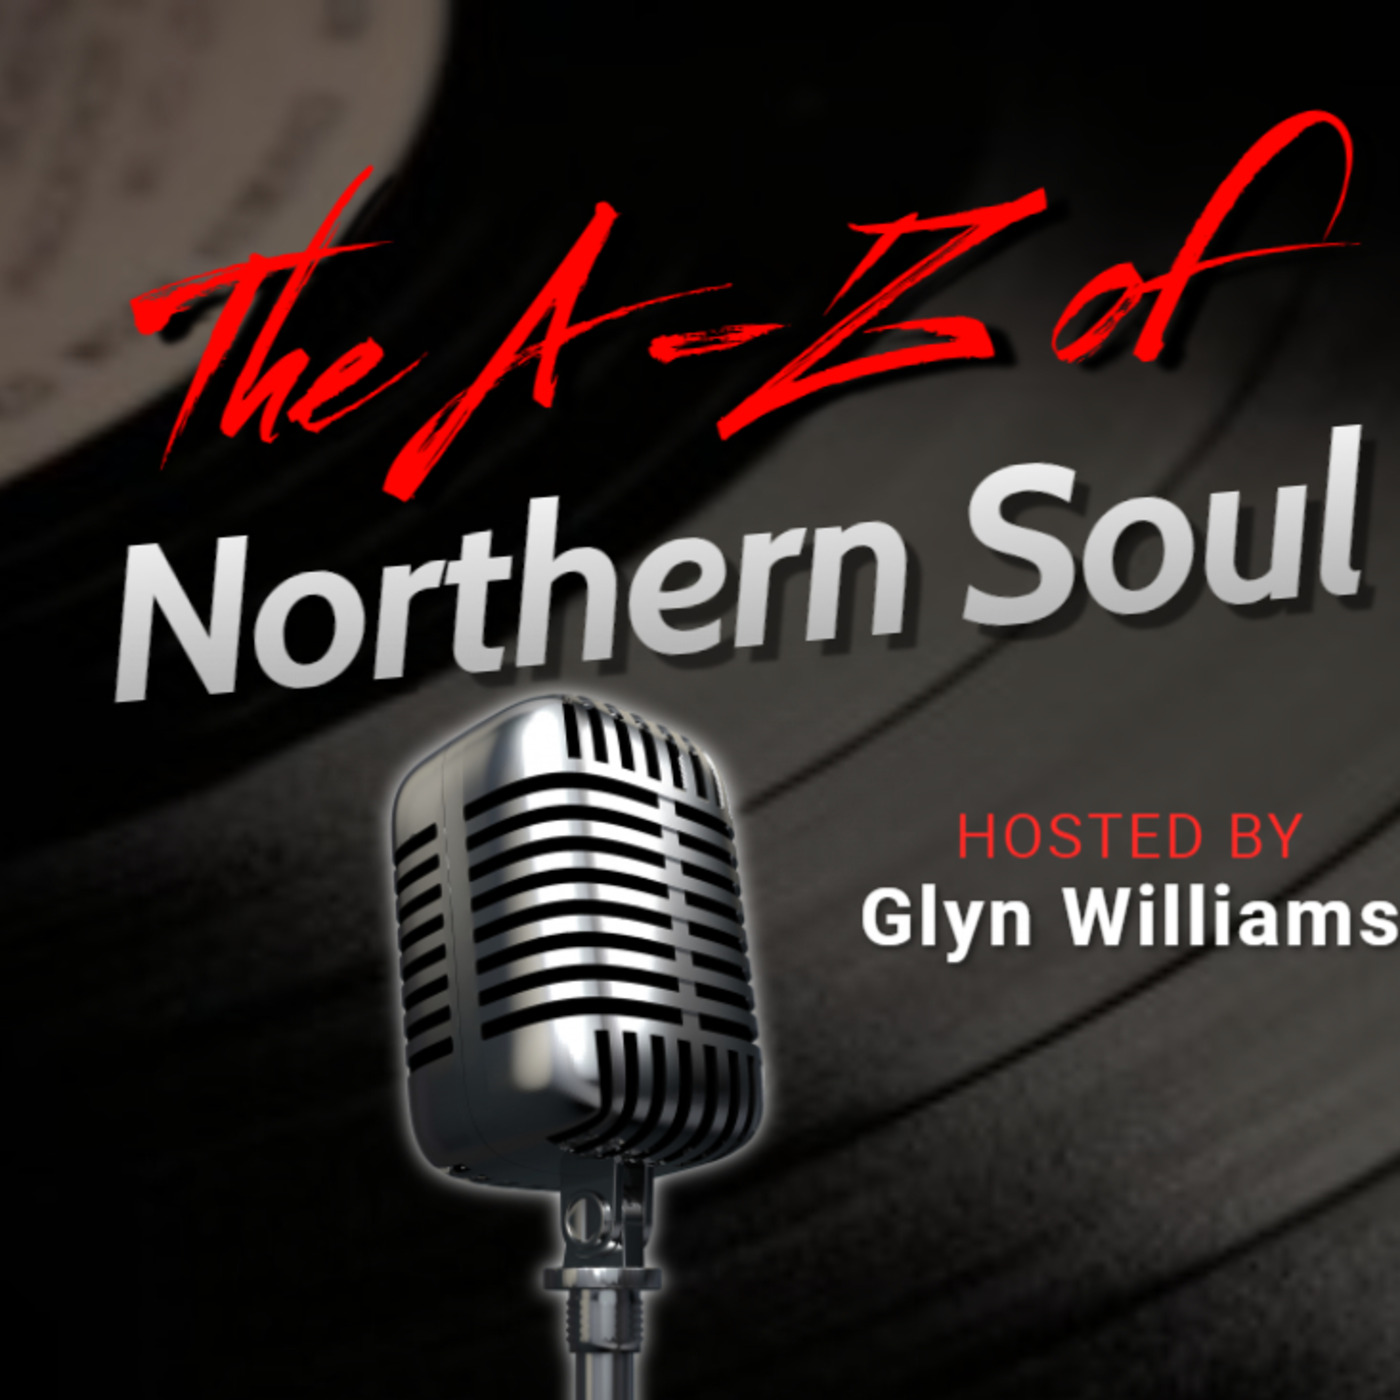 The A-Z of Northern Soul E094